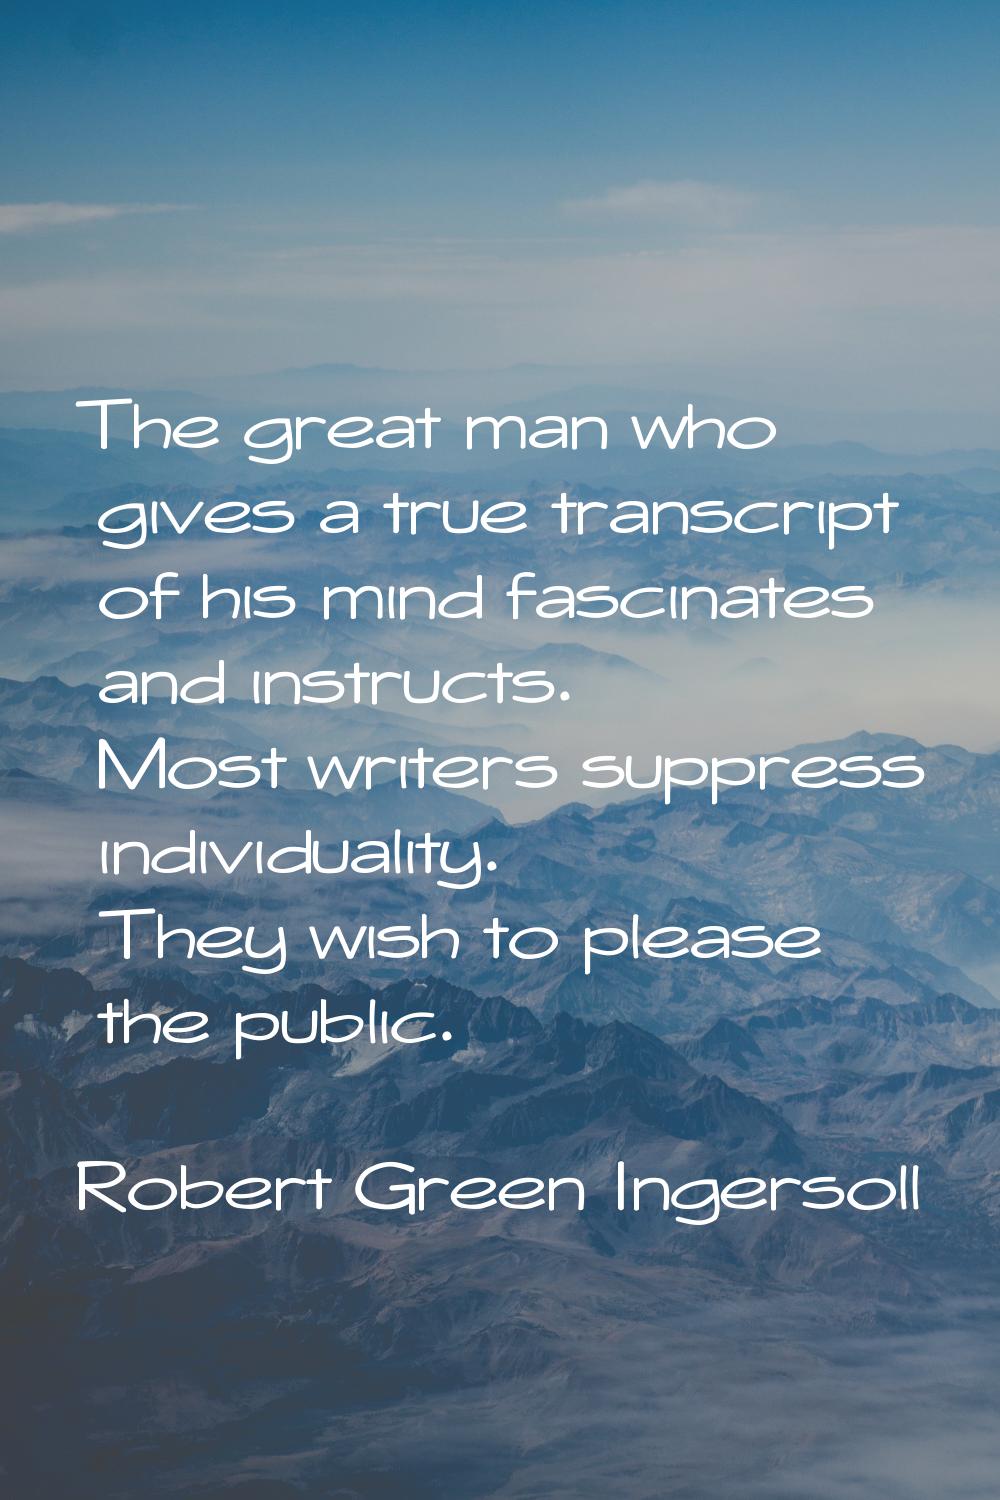 The great man who gives a true transcript of his mind fascinates and instructs. Most writers suppre